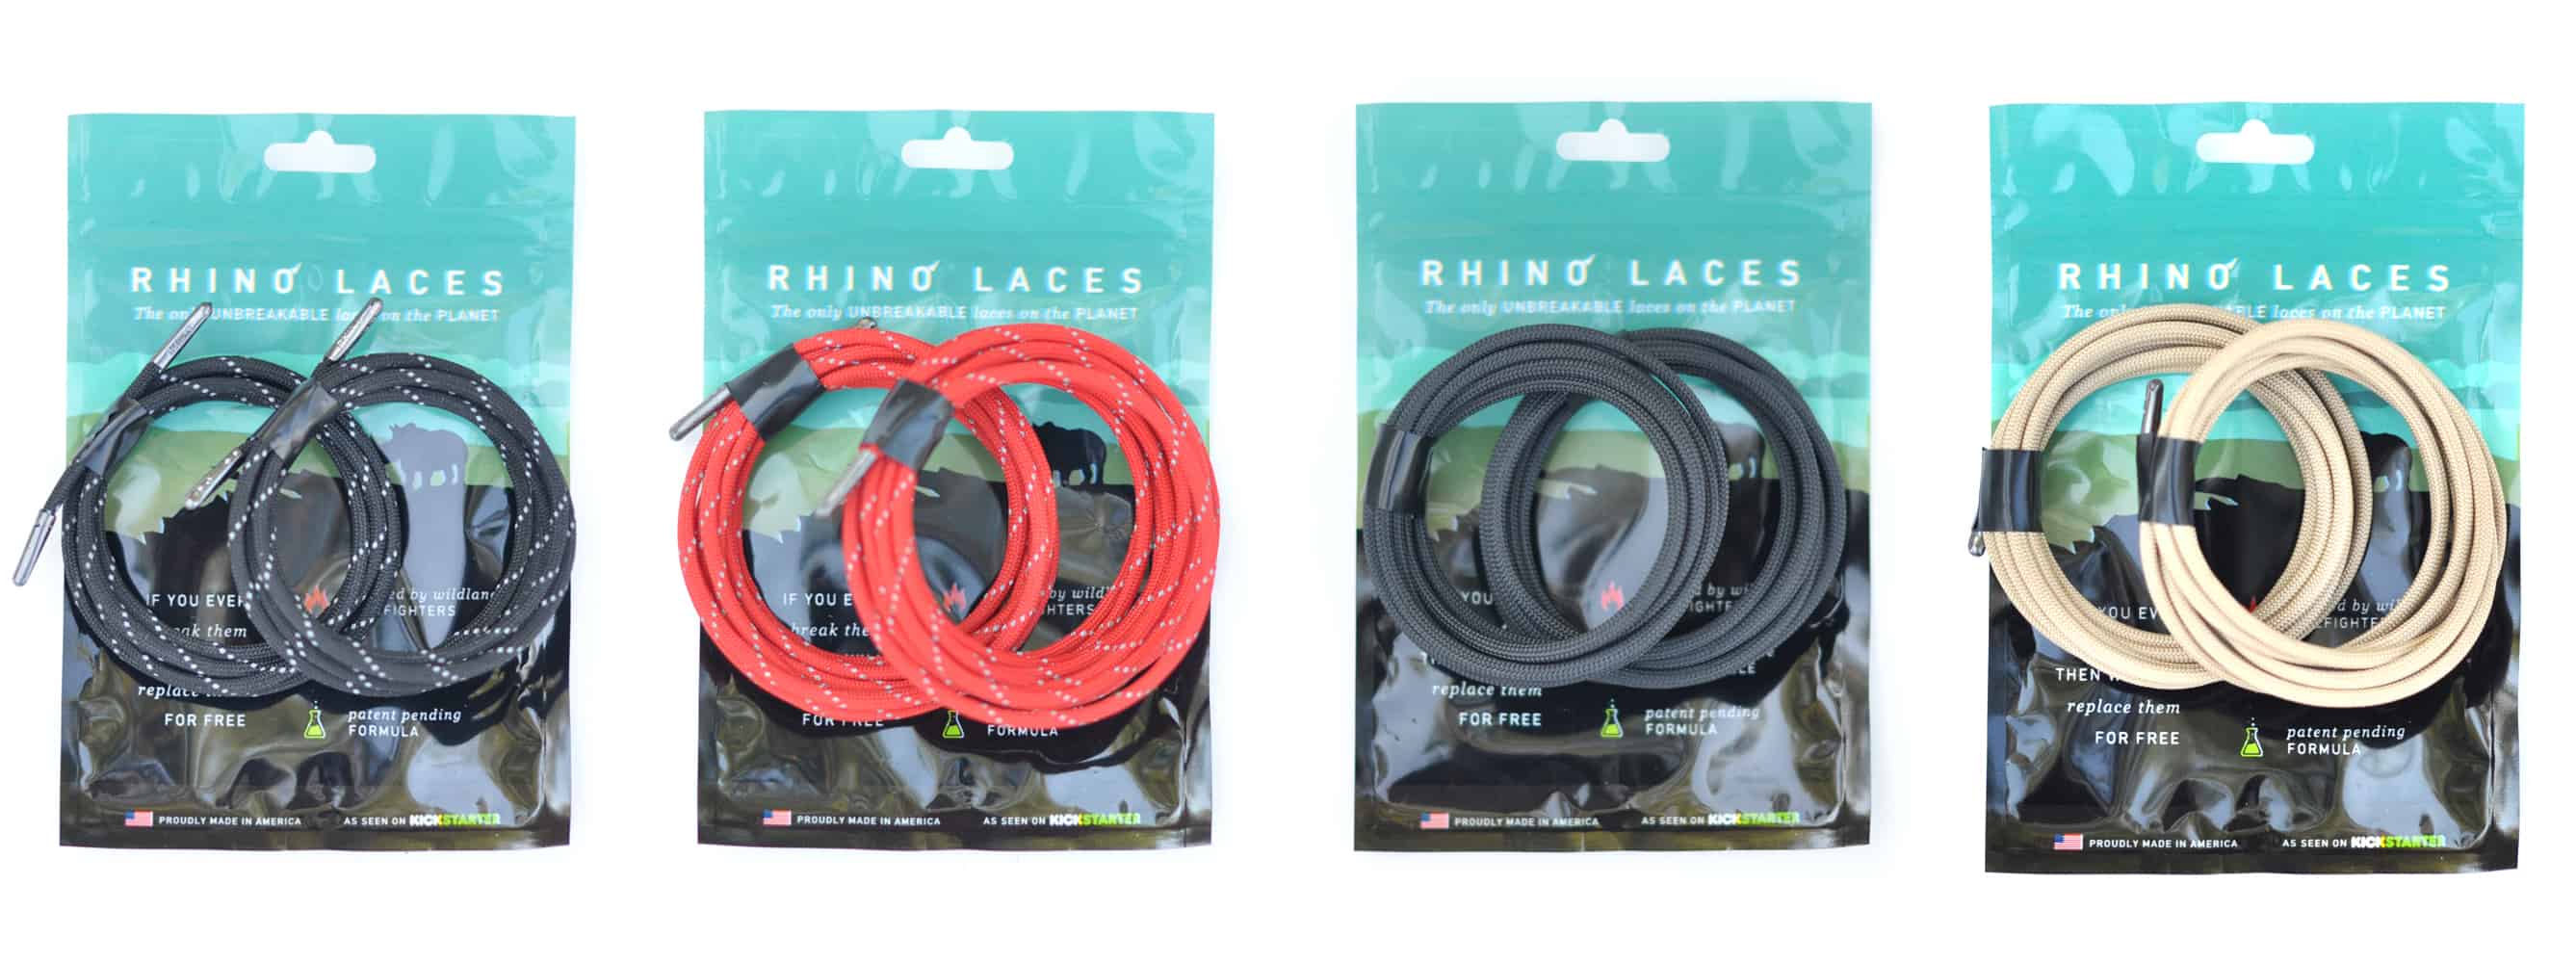 Rhino Laces Unbreakable Shoelace Rhino Laces Unbreakable Shoela Color Variety Fire Proof Cut Proof